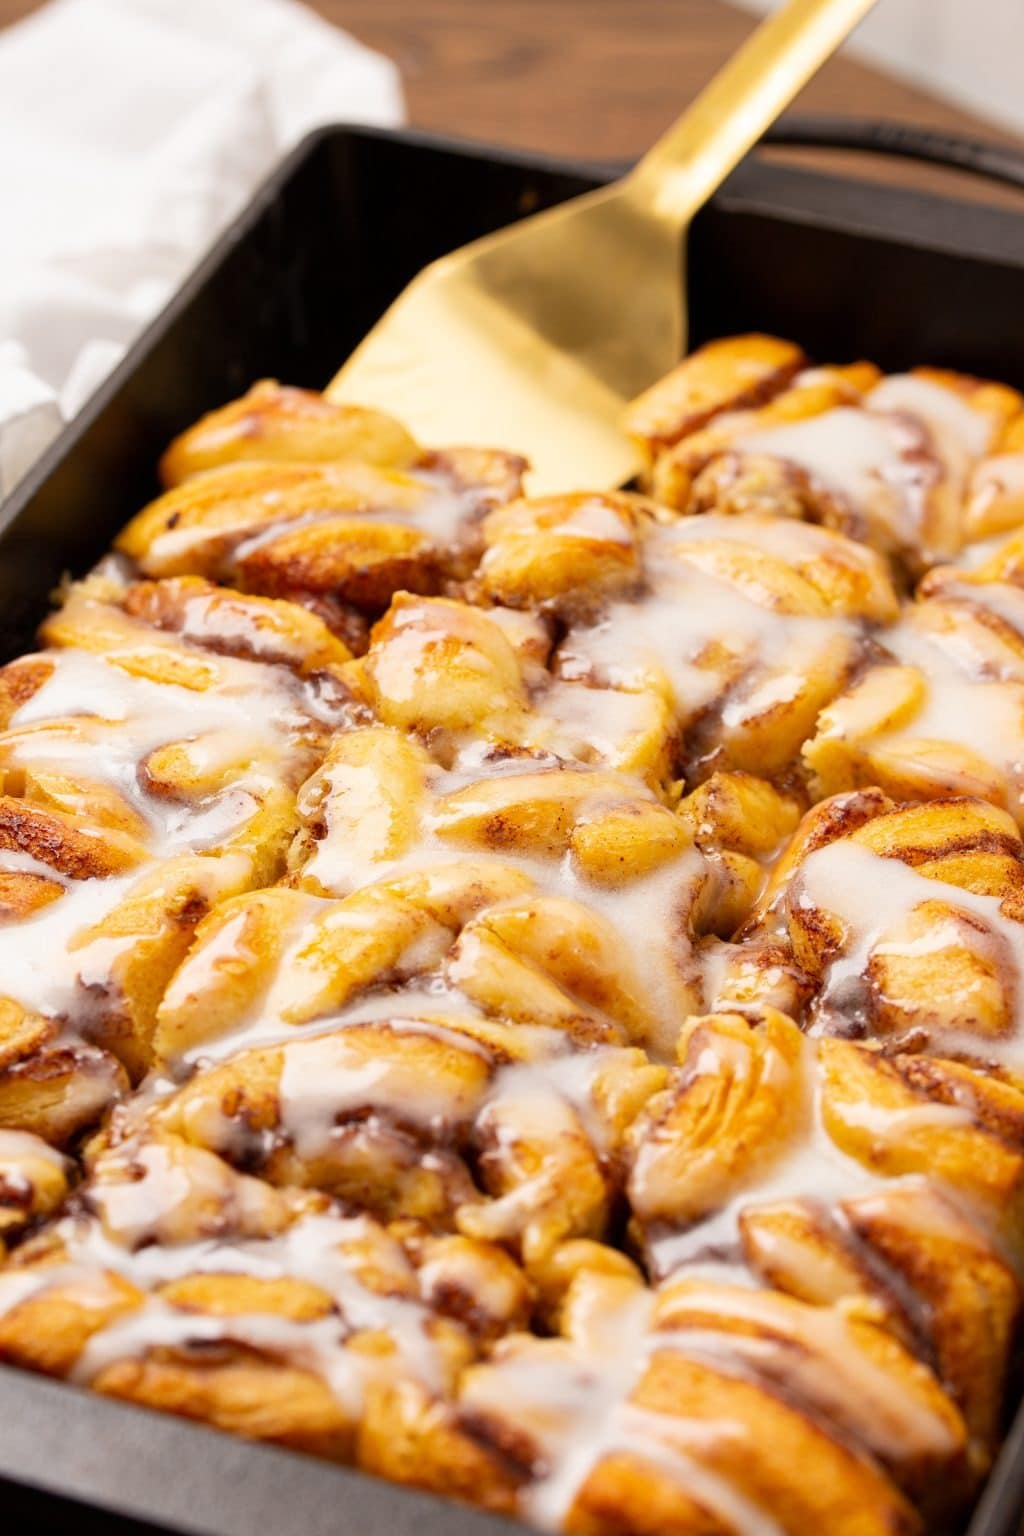 Golden spoon scooping a serving of cinnamon rolls with sugar glazed toppings cooked in a sheet pan.